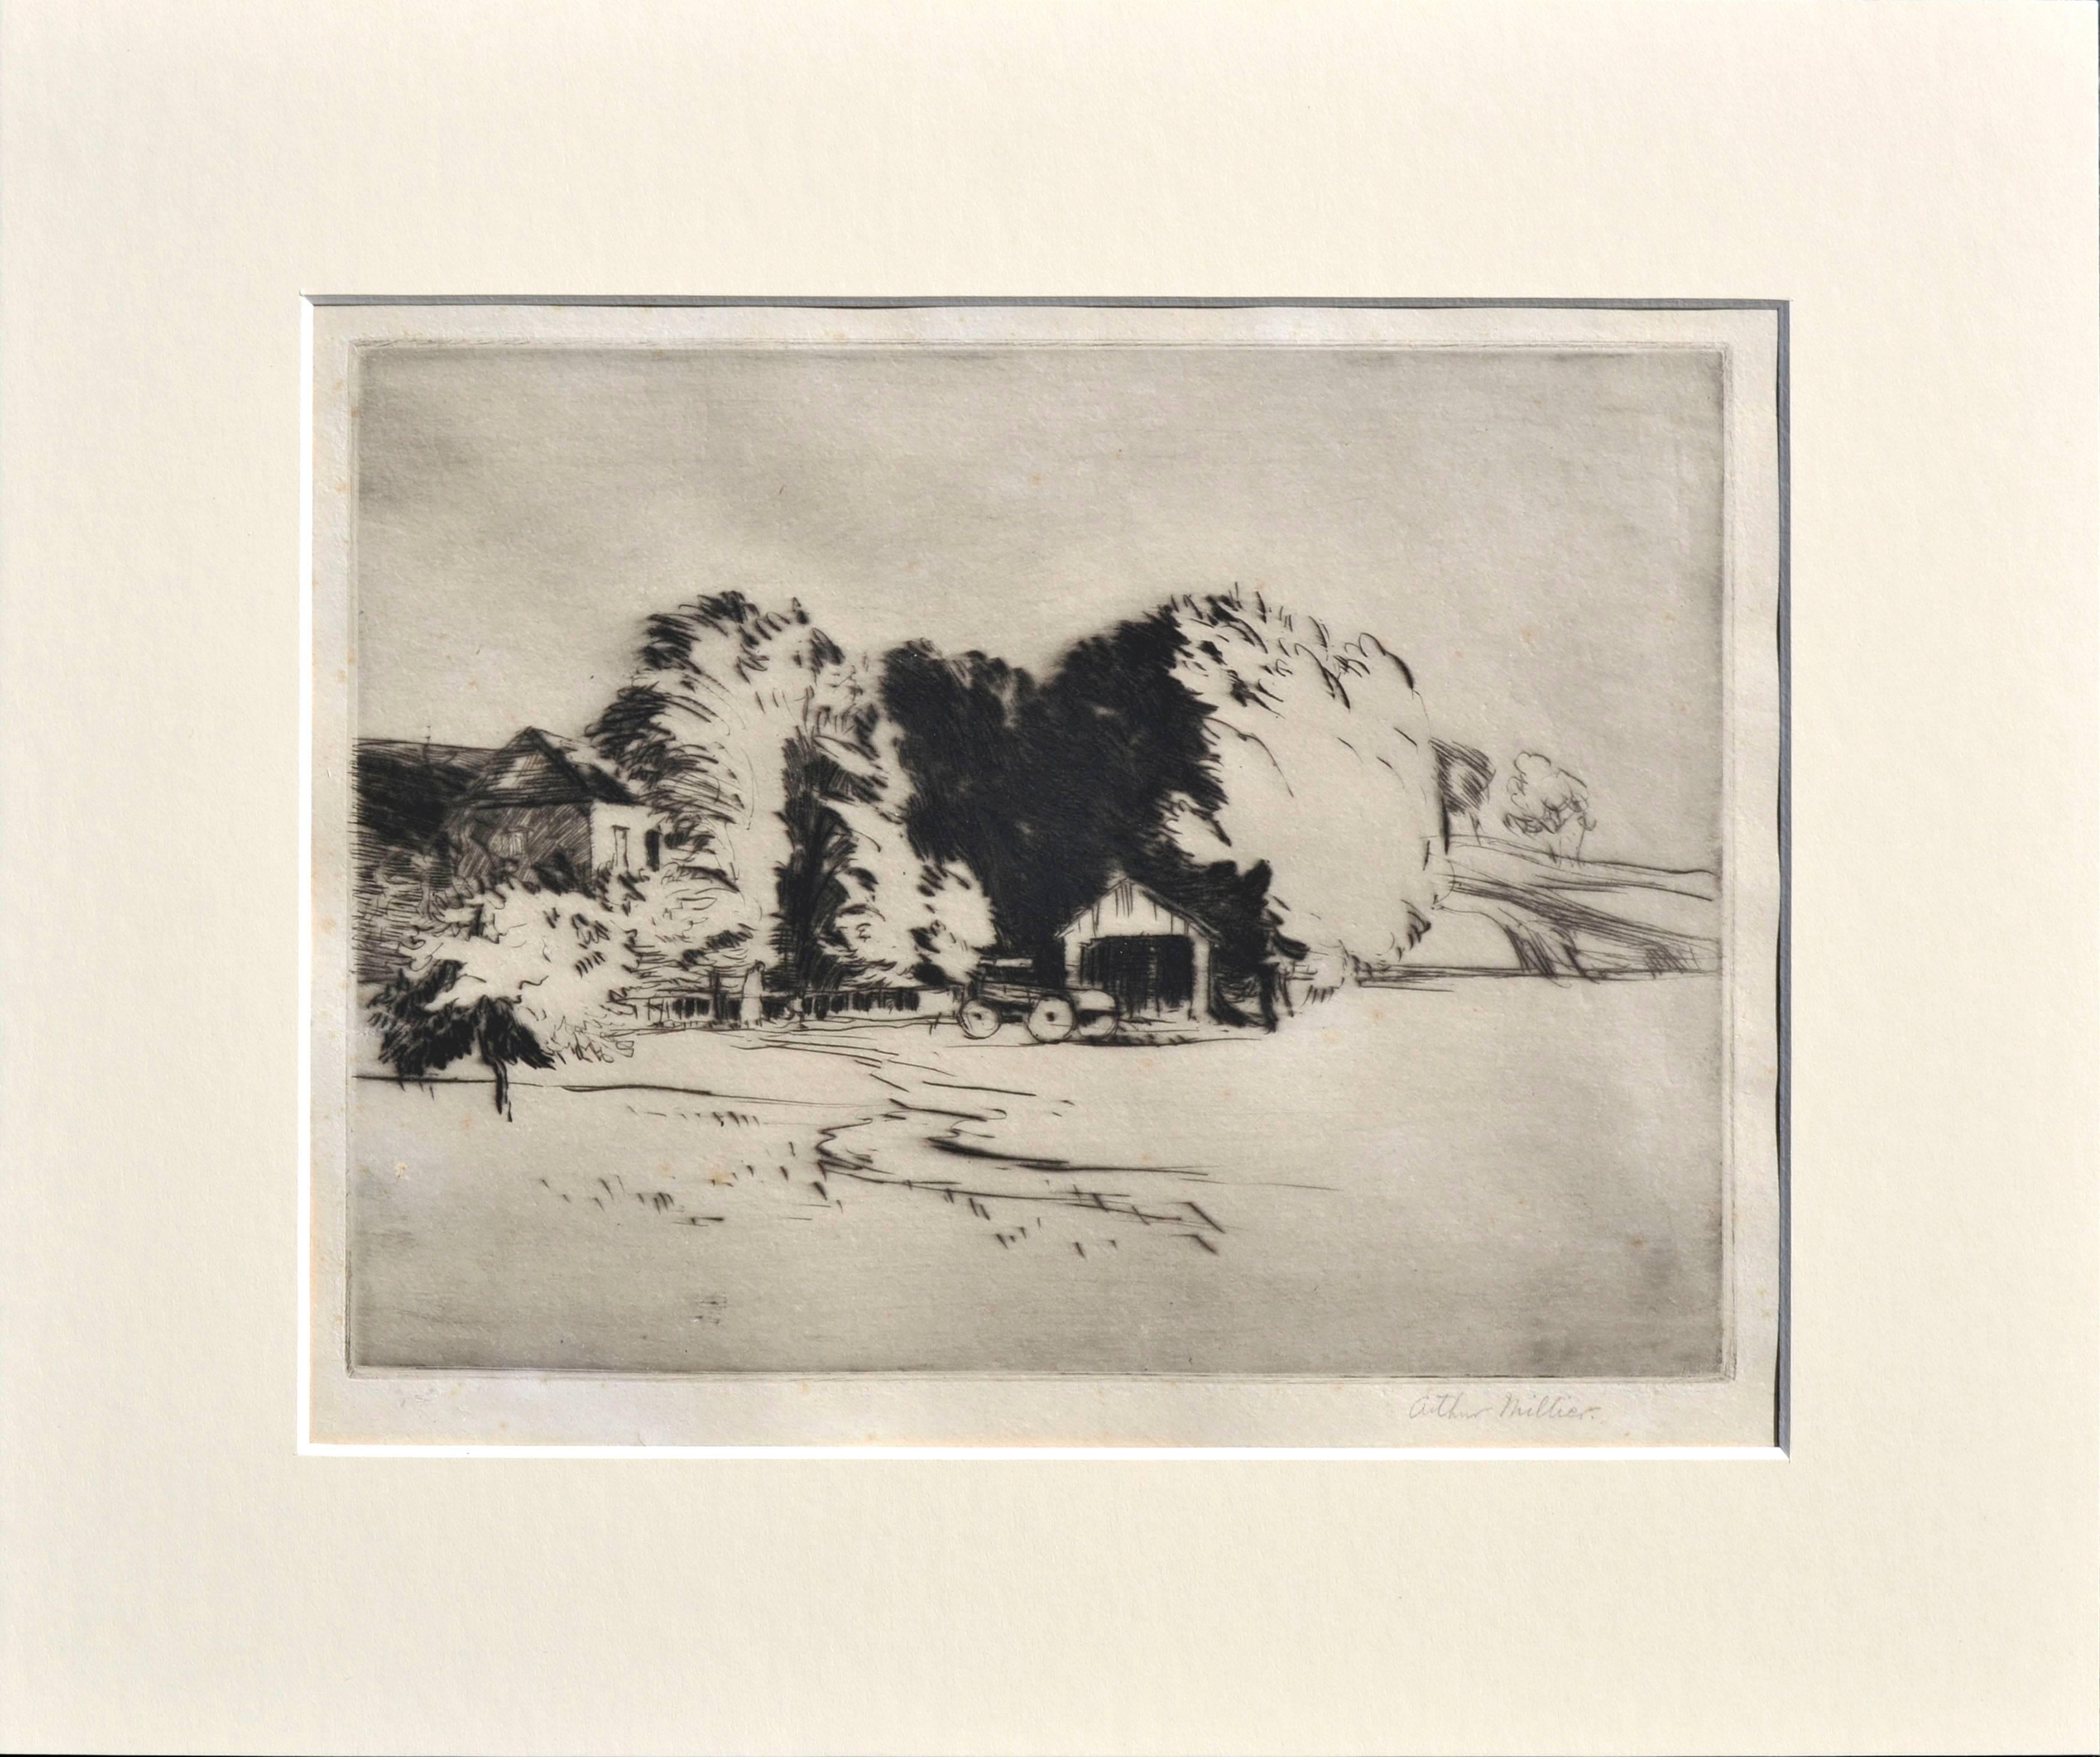 Arthur Millier Landscape Print - The Olives, Santa Monica Canyon - Gift by the Artist to Mary Pickford